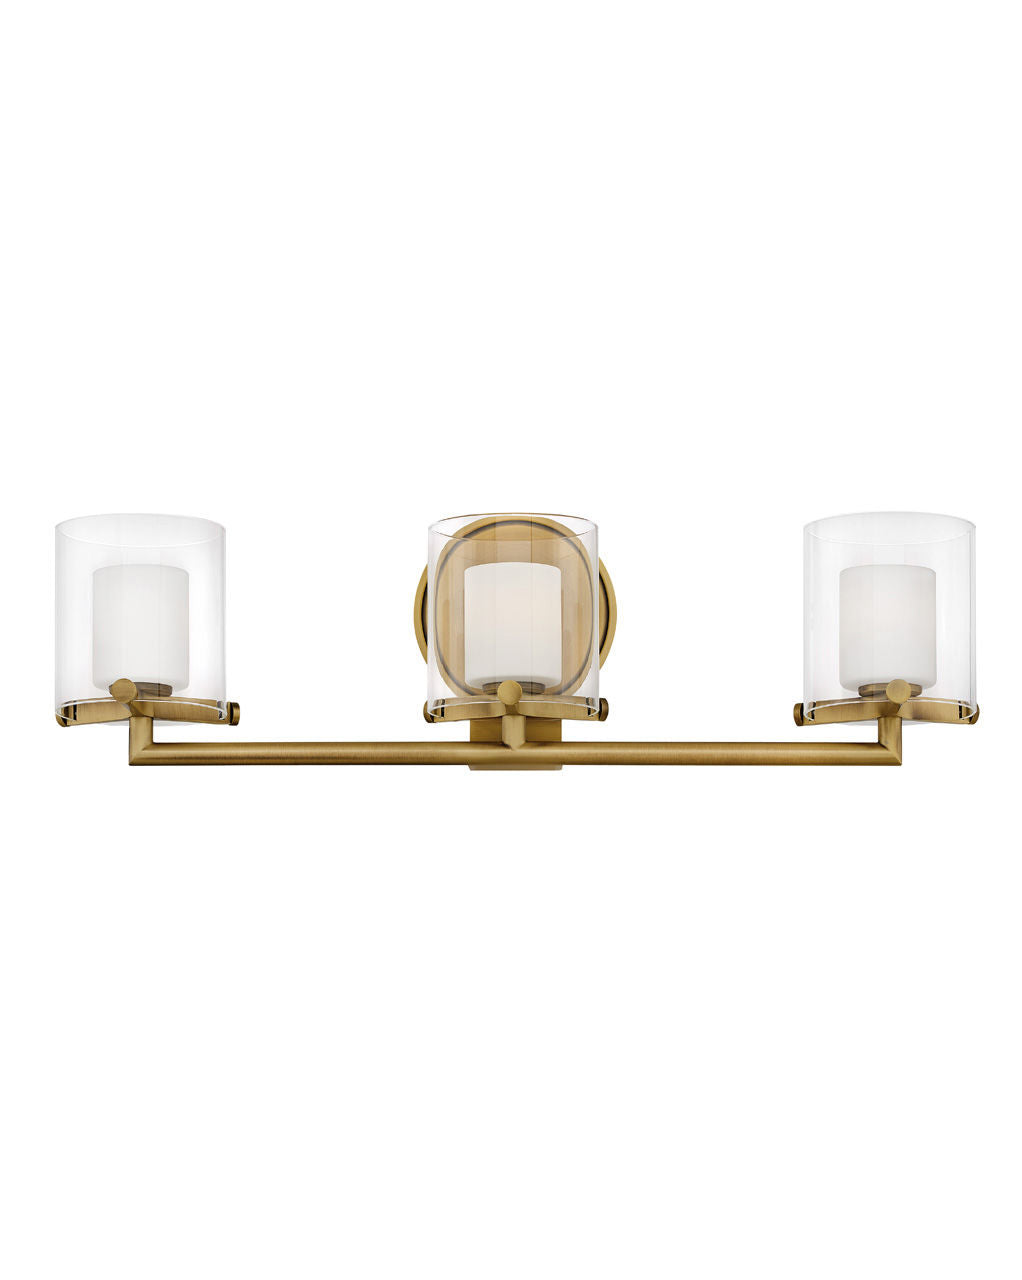 Hinkley Rixon Vanity Wall Sconce Collection